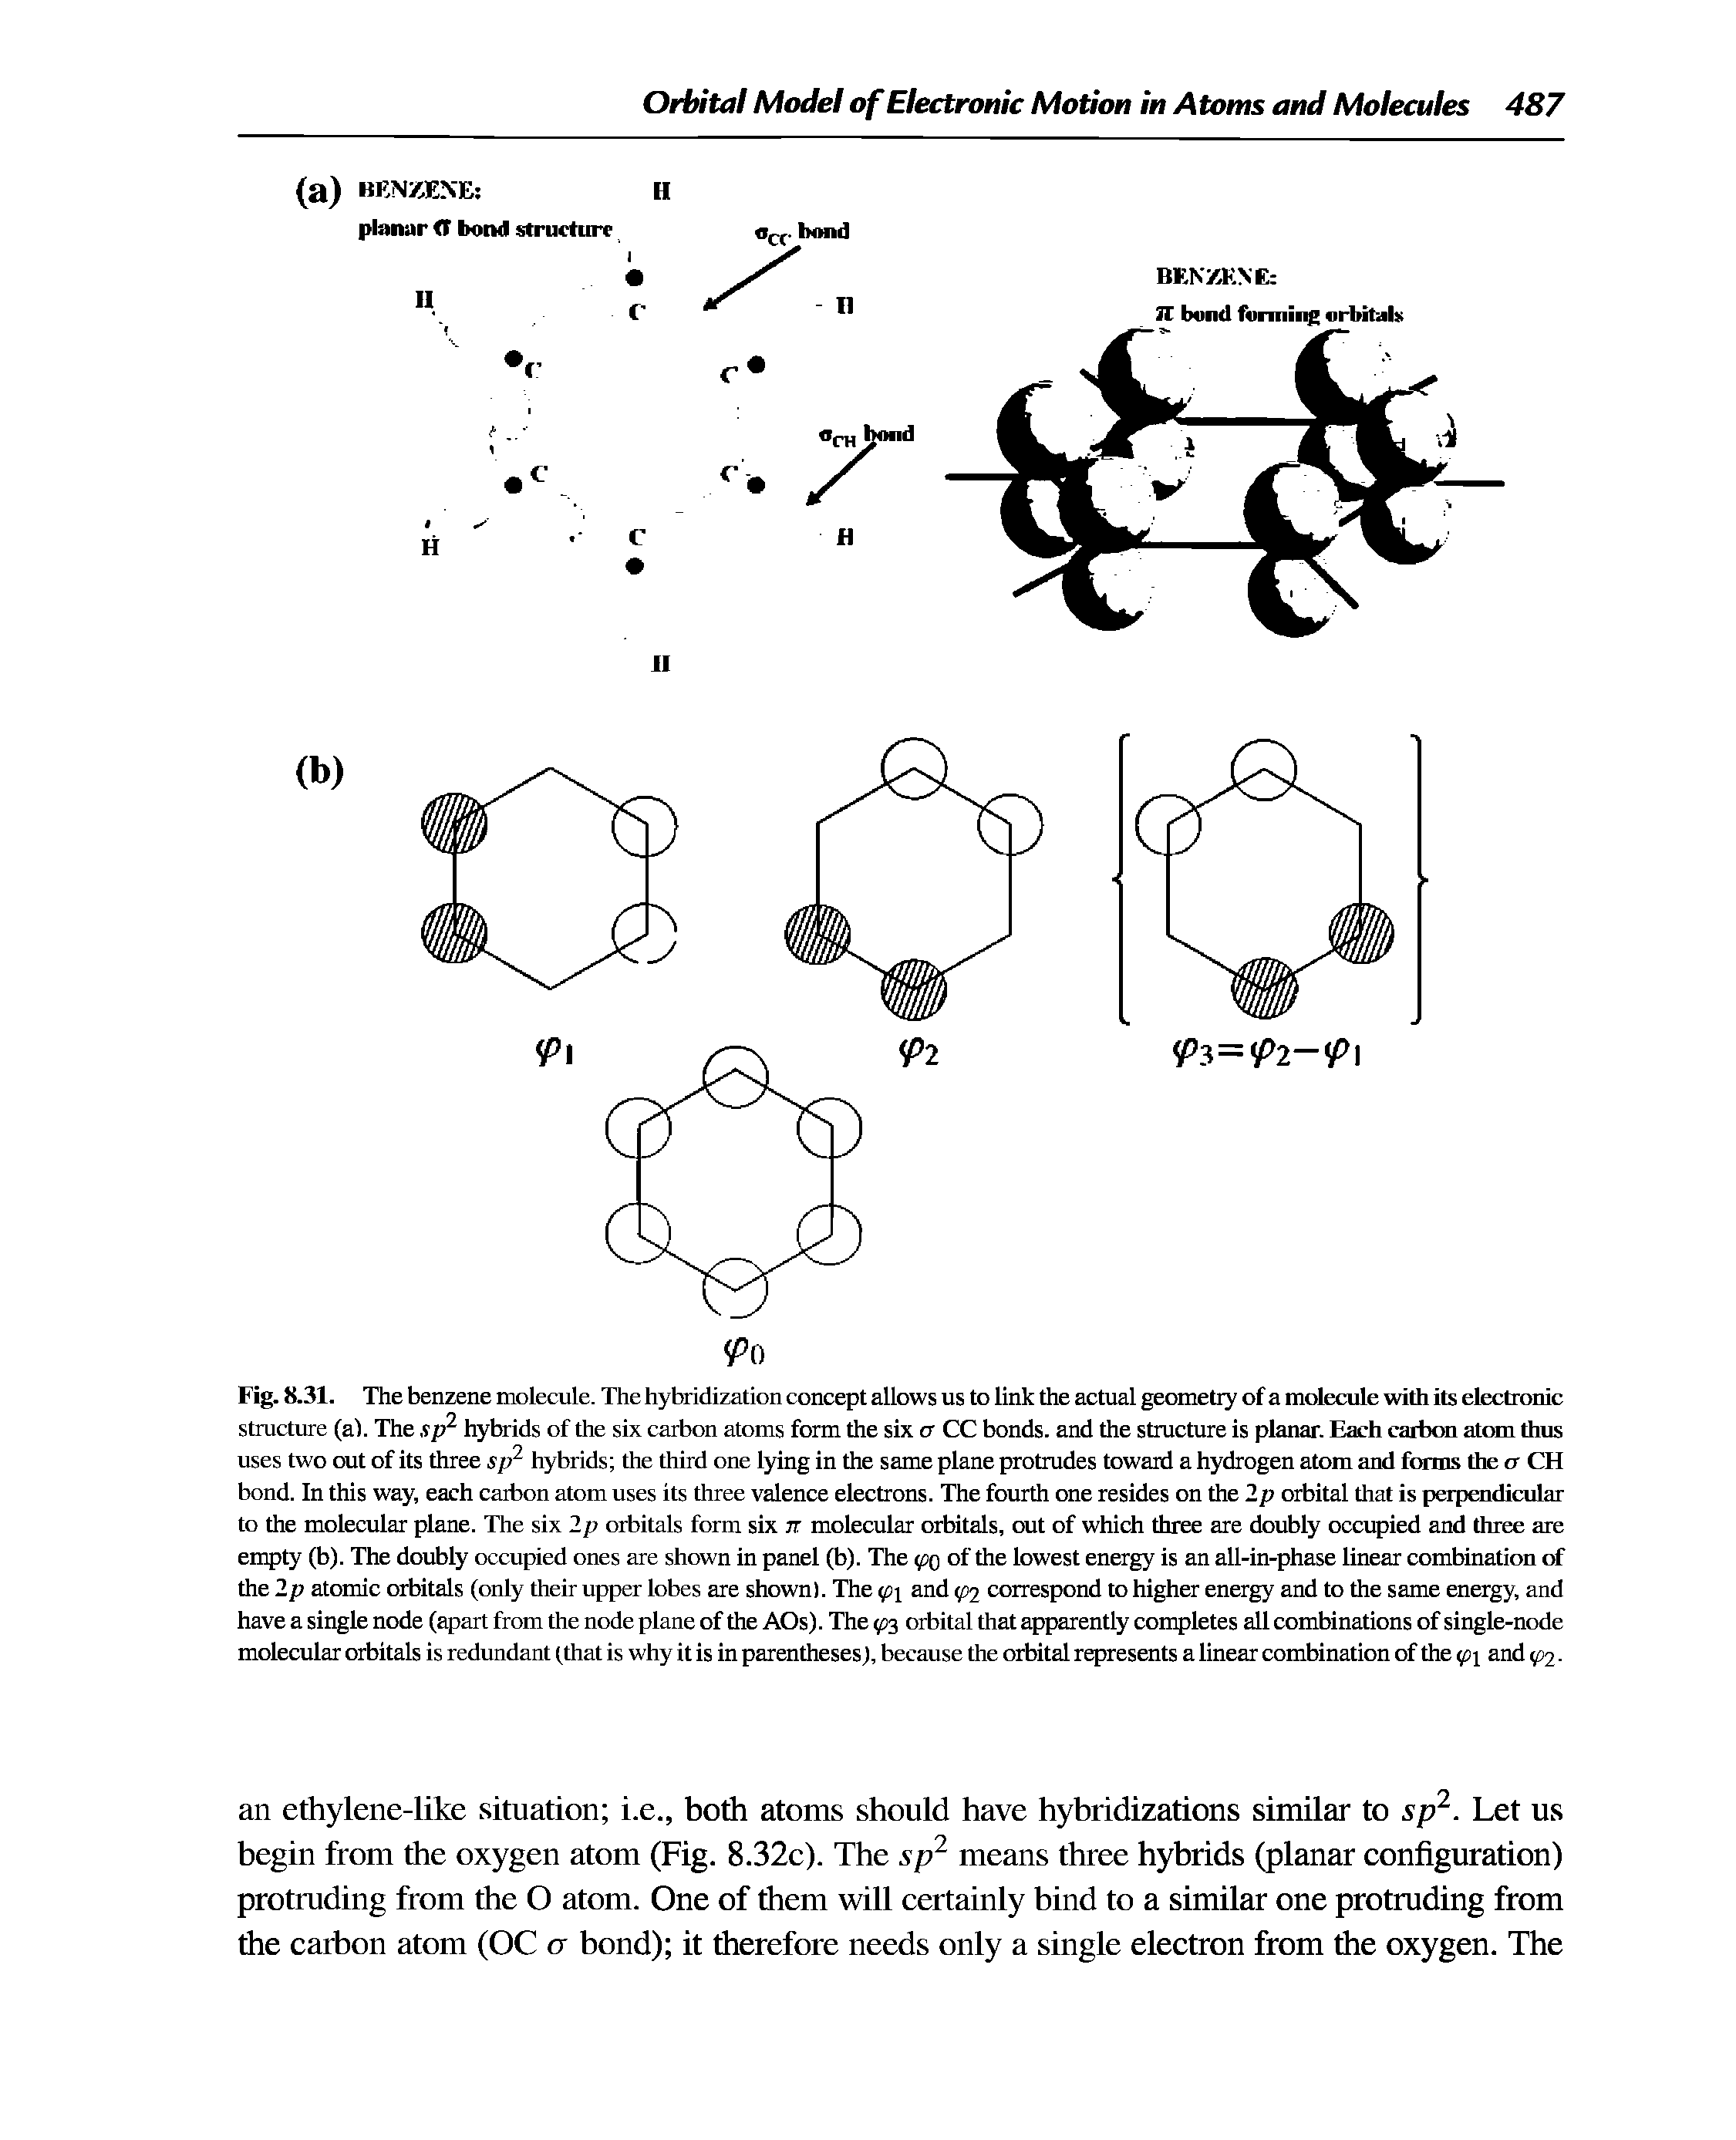 Fig. 8.31. The benzene molecule. The hybridization concept allows us to link the actual geometiy of a molecule with its electronic structure (al. The sp hybrids of the six carbon atoms form the six o CC bonds, and the structure is planar. Each caibon atom thus uses two out of its three s[7 hybrids the third one lying in the same plane protrudes toward a hydrogen atom and forms the a CH bond. In this way, each caibon atom uses its three valence electrons. The fourth one resides on the 2p orbital that is perpendicular to the molecular plane. The six 2p orbitals form six rr molecular orbitals, out of which three are doubly occupied and three are empty (b). The doubly occupied ones are shown in panel (b). The (fio of the lowest energy is an all-in-phase linear combination rf the 2p atomic orbitals (only their upper lobes are shown). The and <fi2 correspond to higher energy and to the same energy, and have a single node (apart from the node plane of the AOs). The (ps orbital that apparently completes all combinations of single-node molecular orbitals is redundant (that is why it is in parentheses), because the orbital represents a linear combination of the fix and <p2.